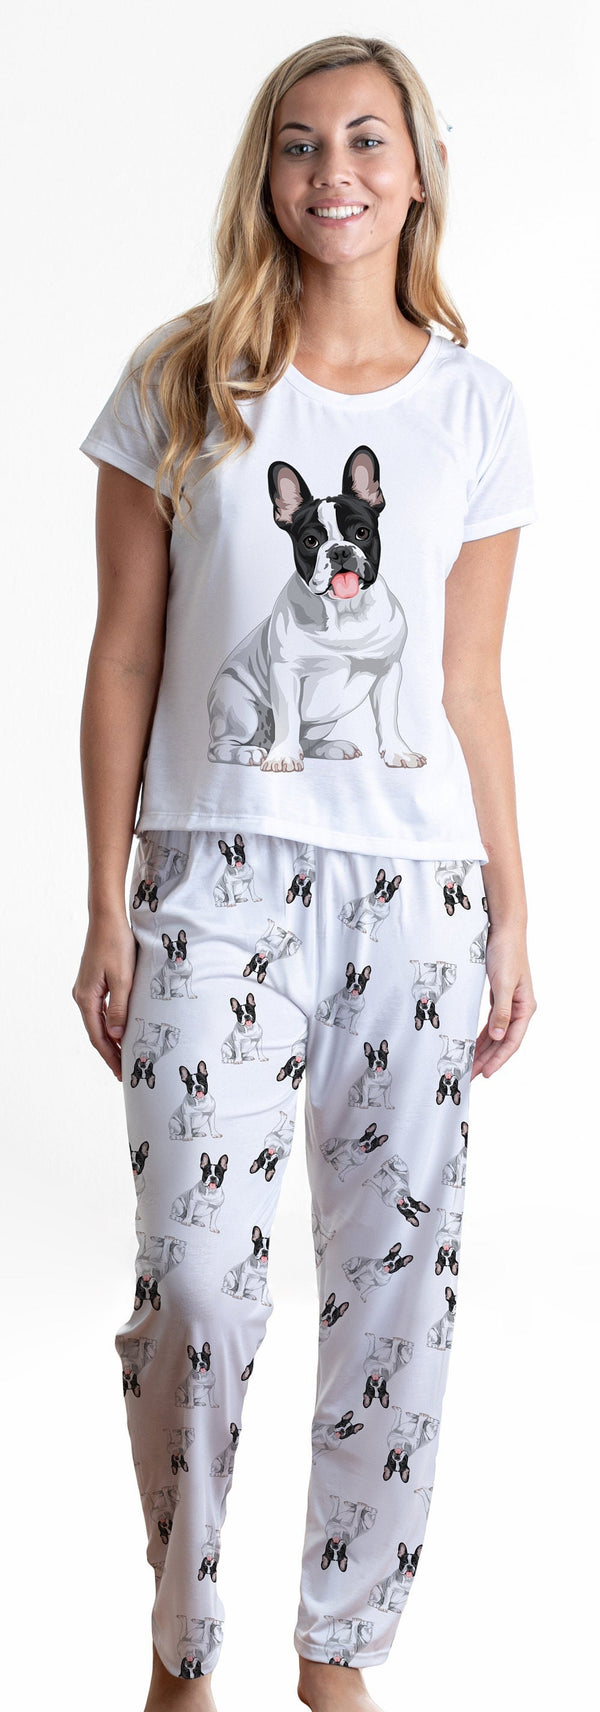 Black and white frenchie 2 piece Pj set with long pants - French bulldog